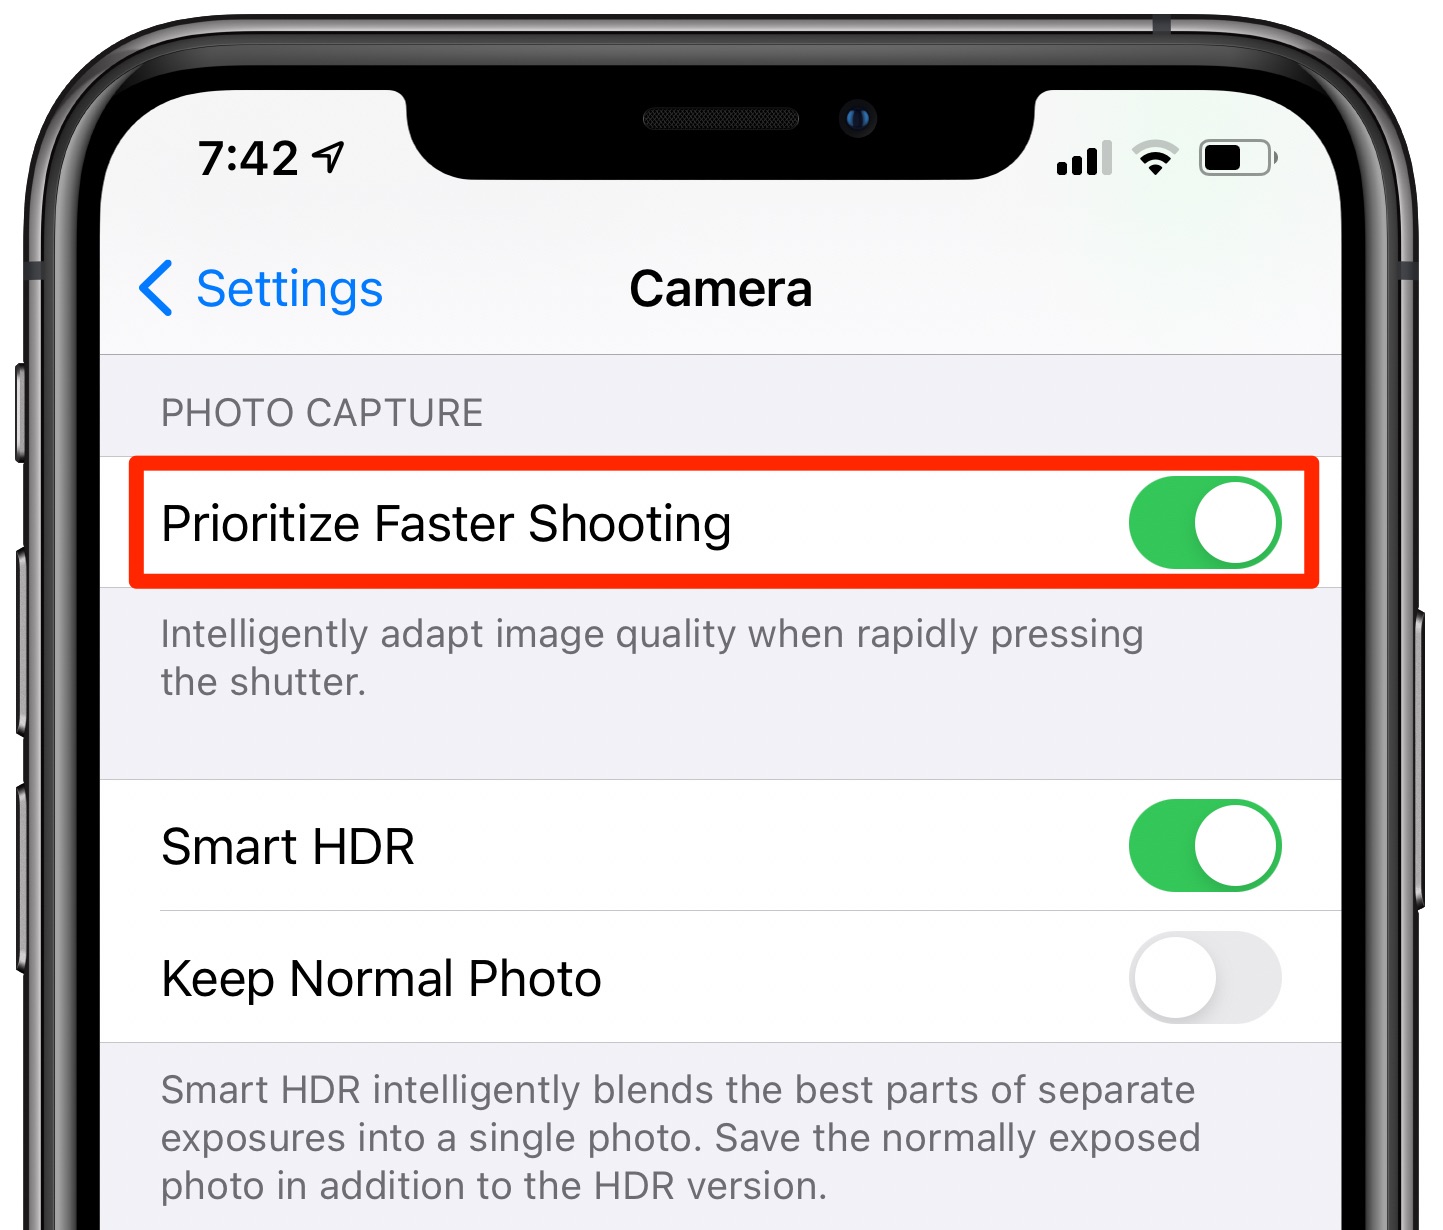 iPhone camera - the Prioritize Faster Shooting option enabled in Settings